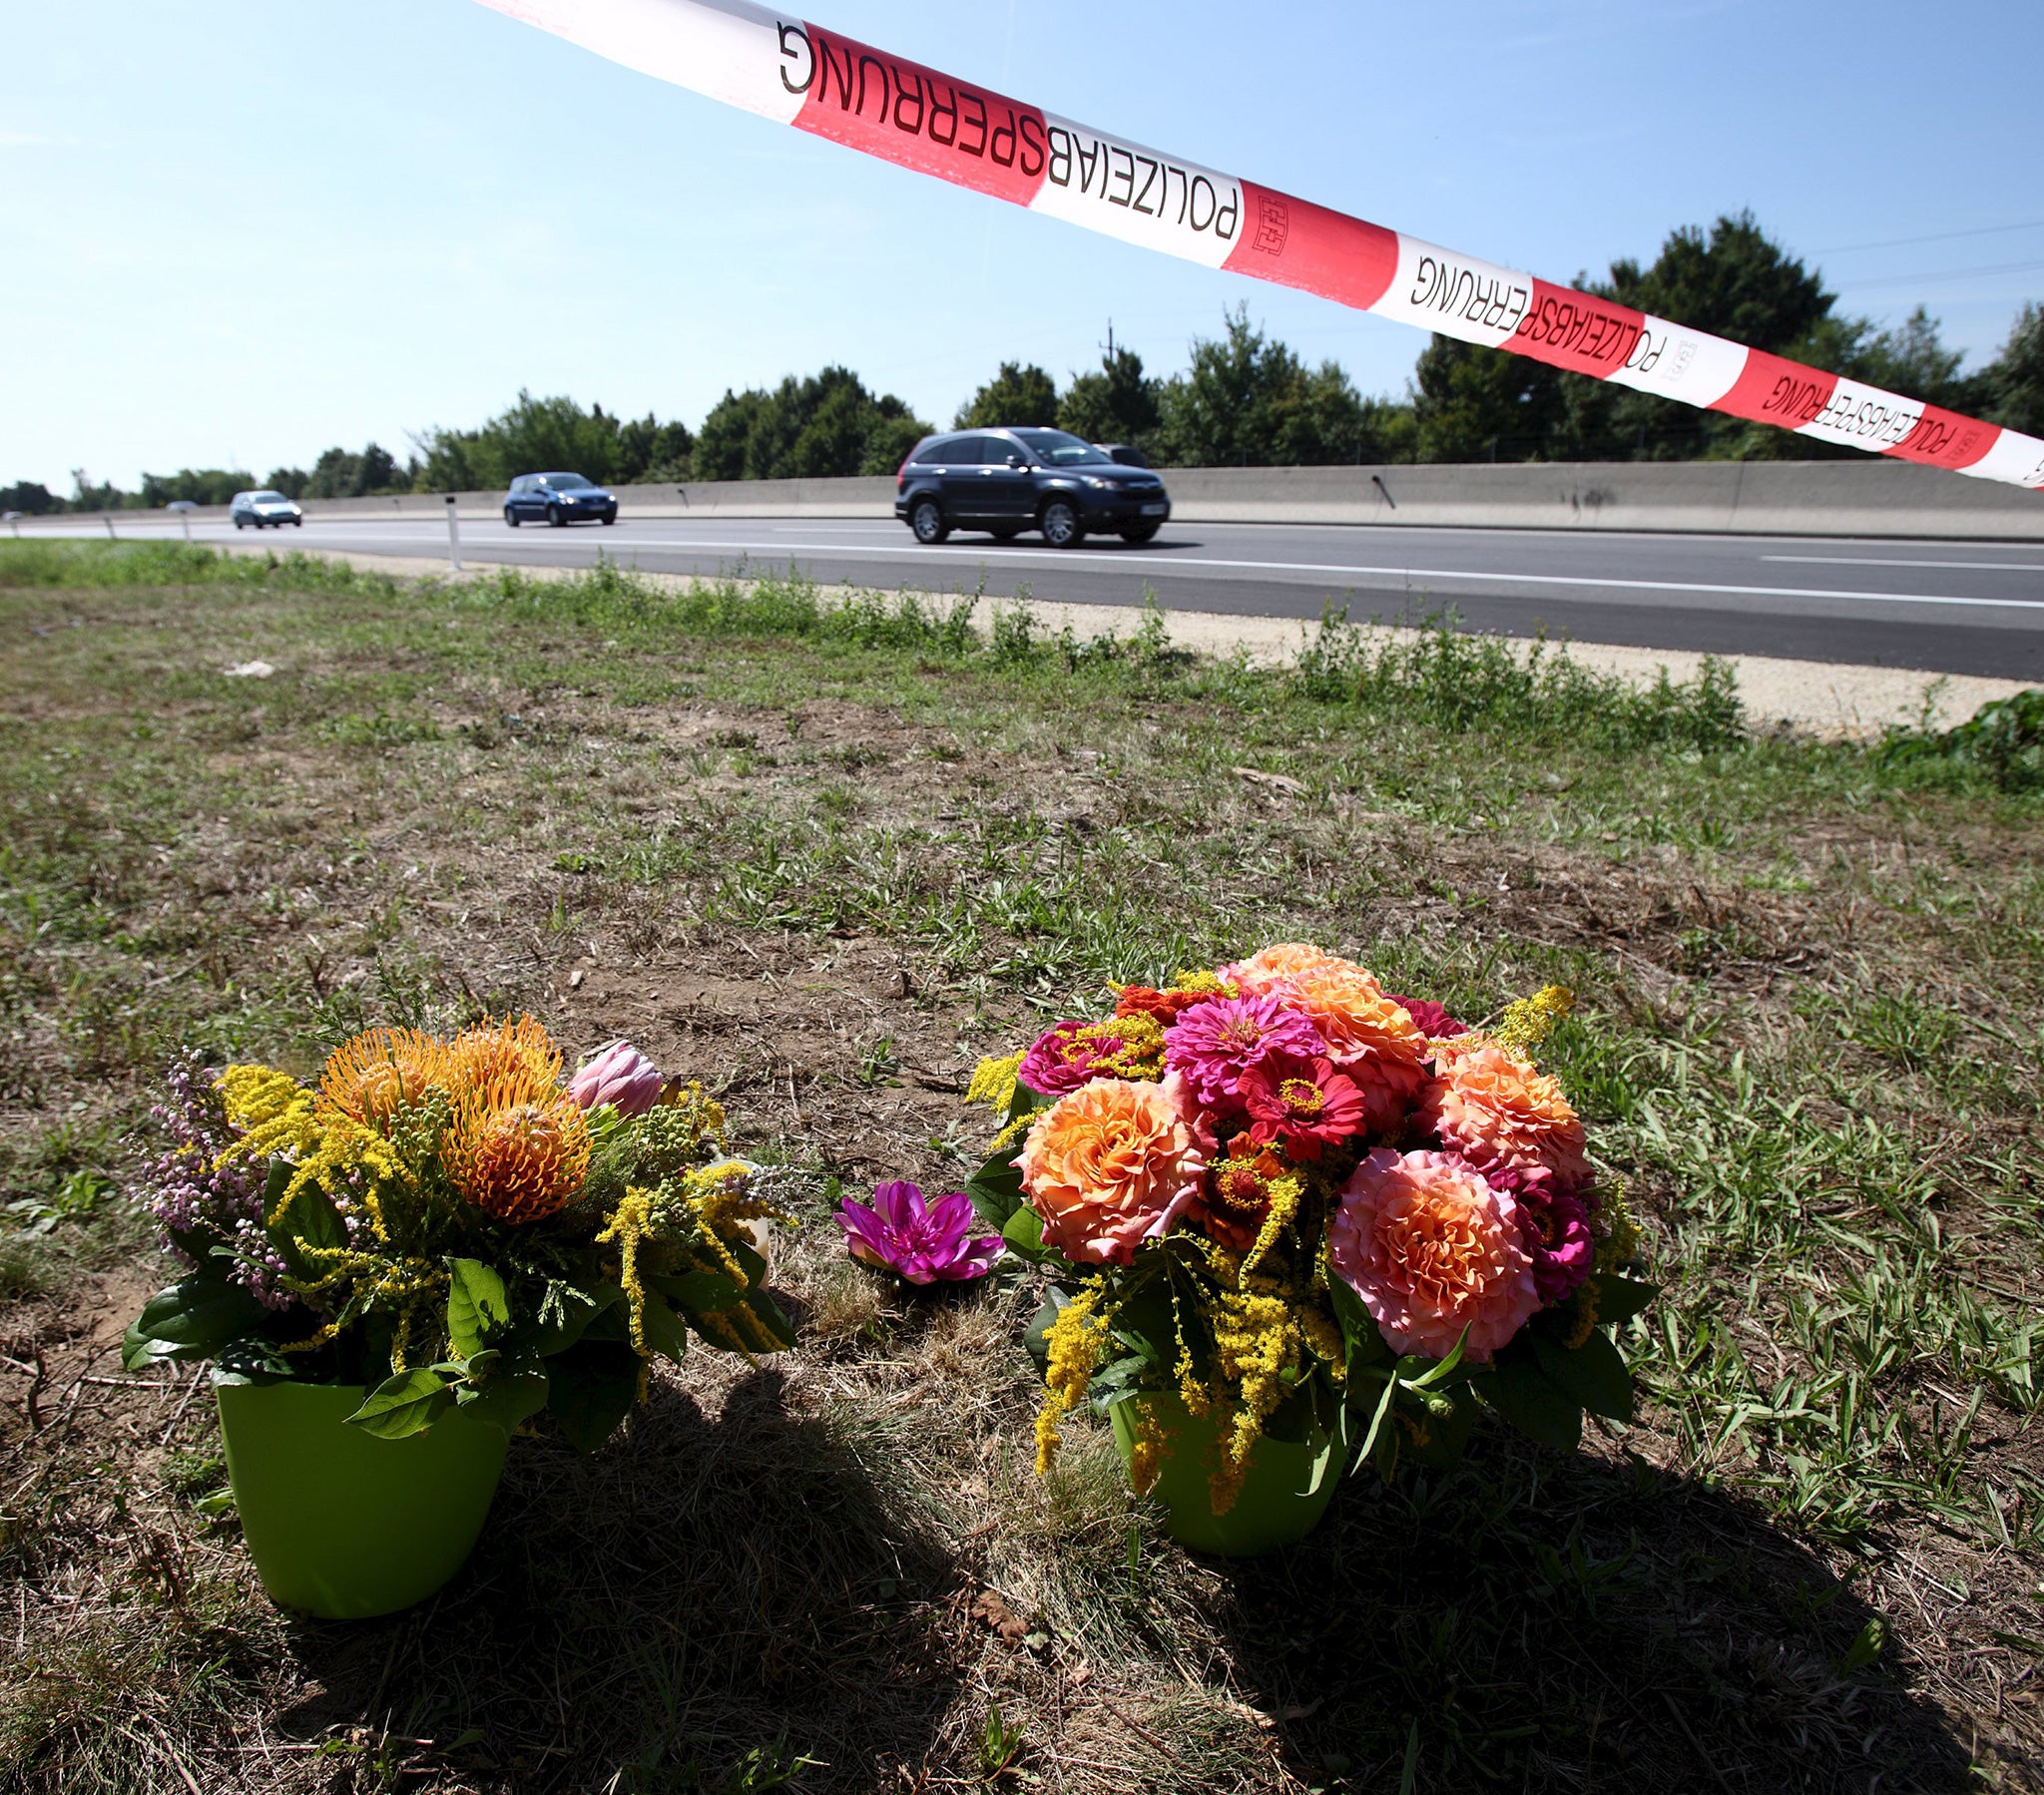 Flowers and candles are placed at the site where a refrigerated truck with decomposing bodies was found by an Austrian motorway